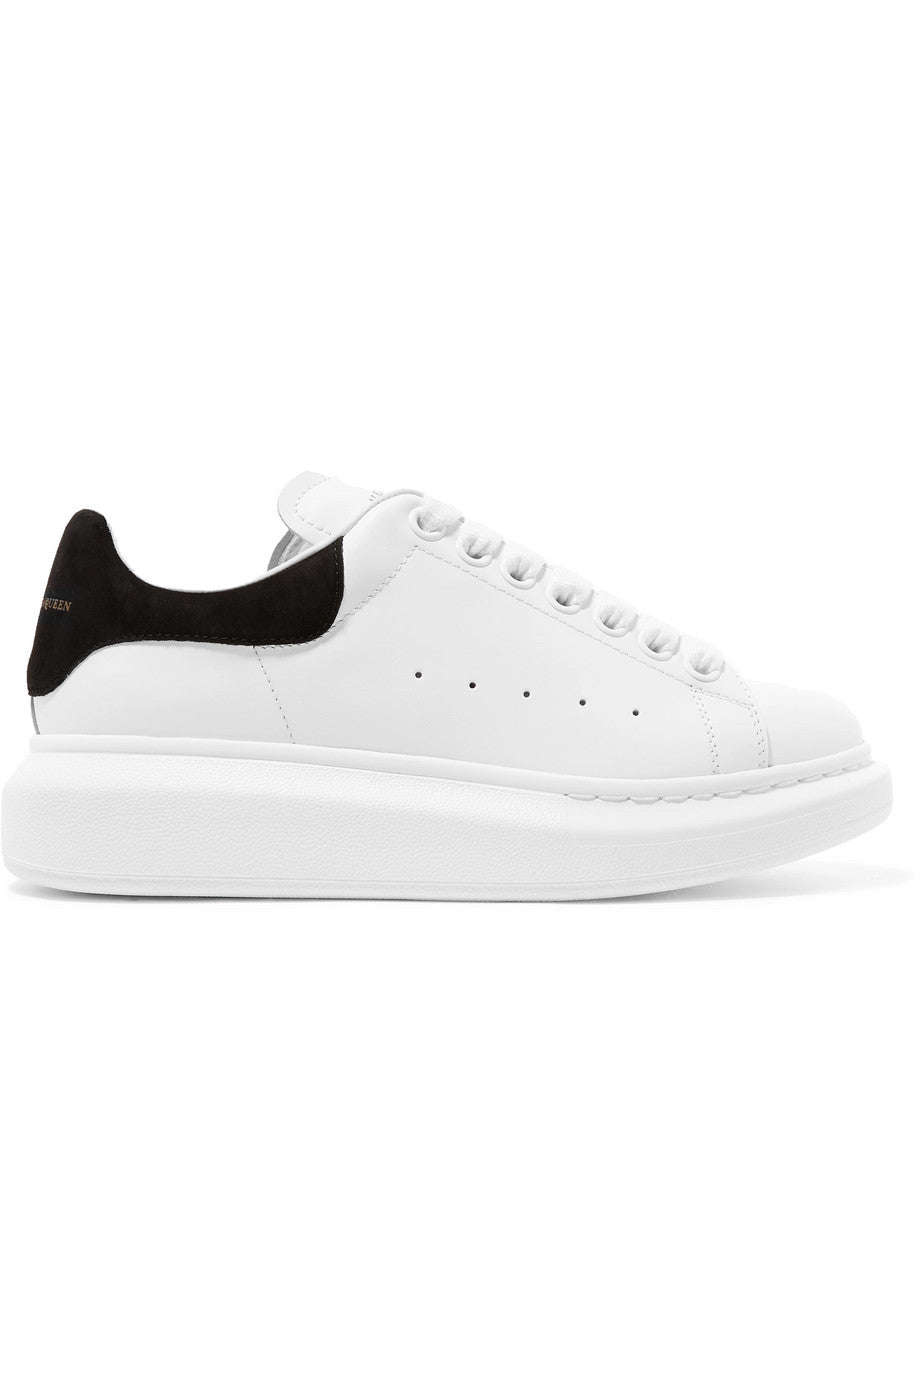 Alexander Mcqueen - White suede-trimmed leather exaggerated sole sneakers